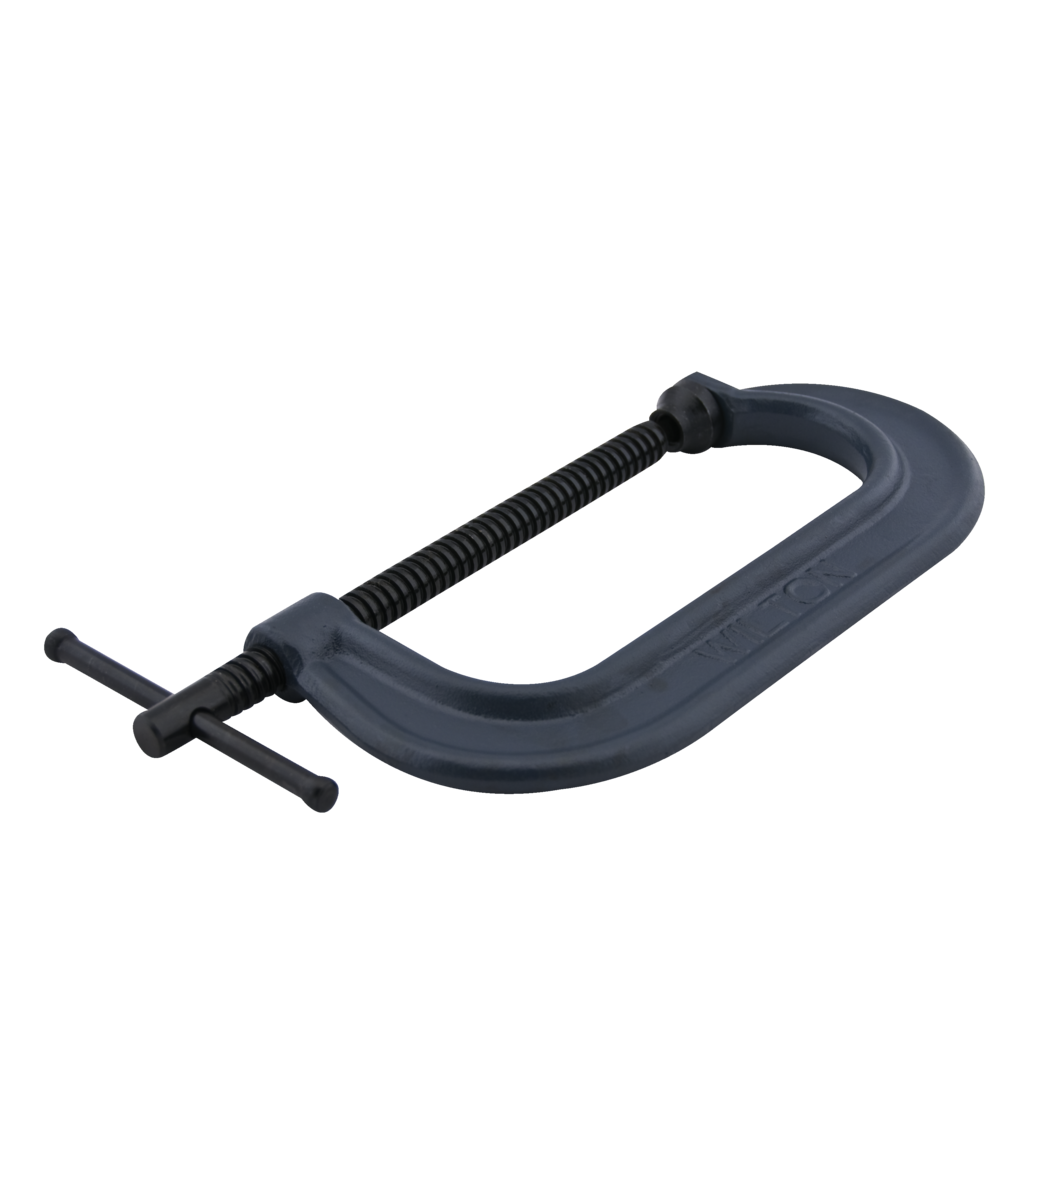 806, 800 Series Standard Depth Drop Forged C-Clamp, 0 - 6” Opening, 2-15/16” Throat